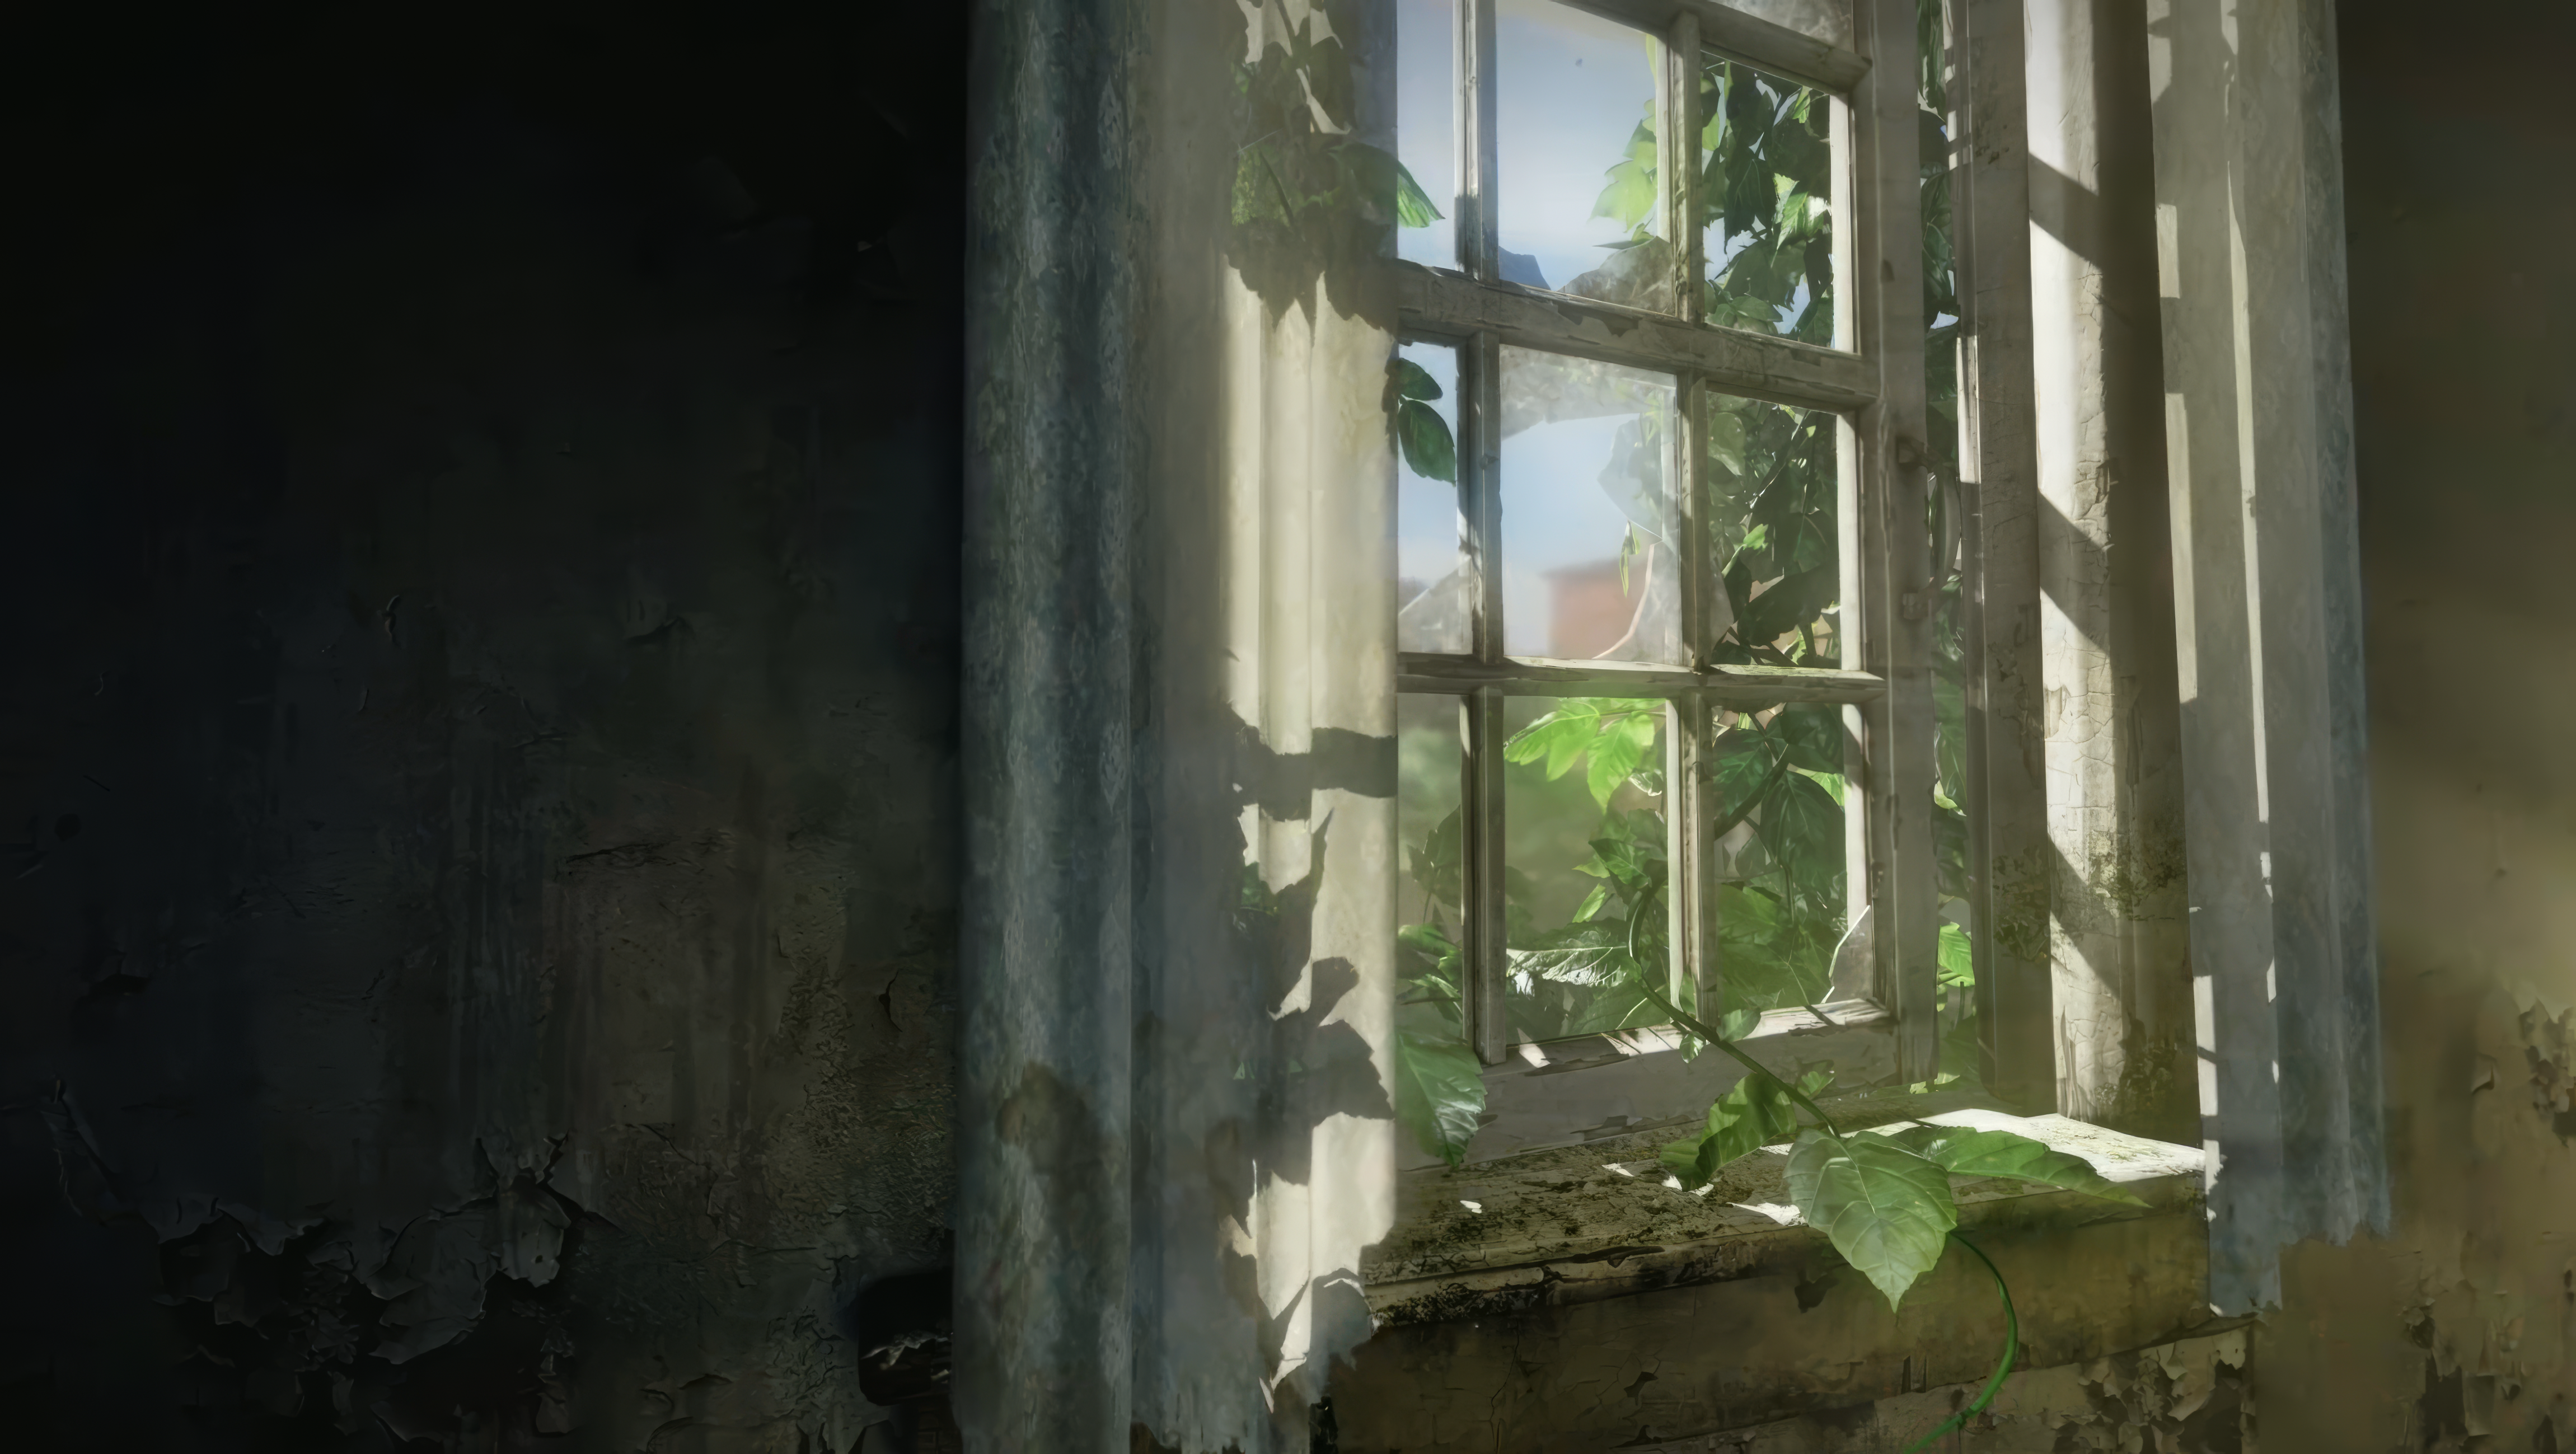 General 4602x2598 AI art urban decay architecture window sunlight leaves curtains natural light vines interior